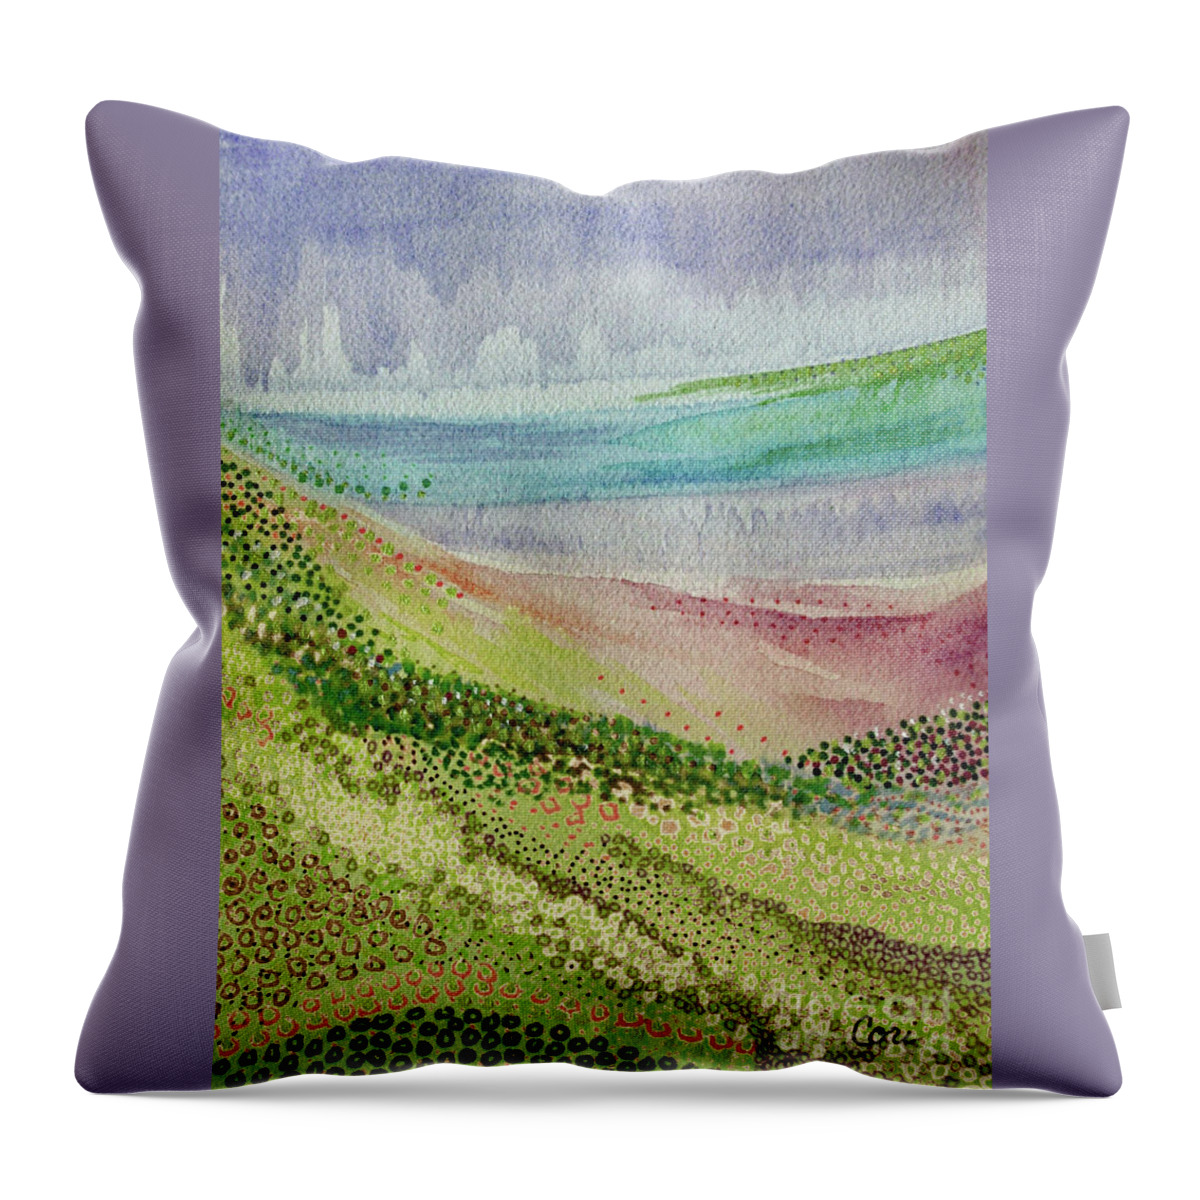 Blooming Throw Pillow featuring the digital art Blooming 1002 by Corinne Carroll